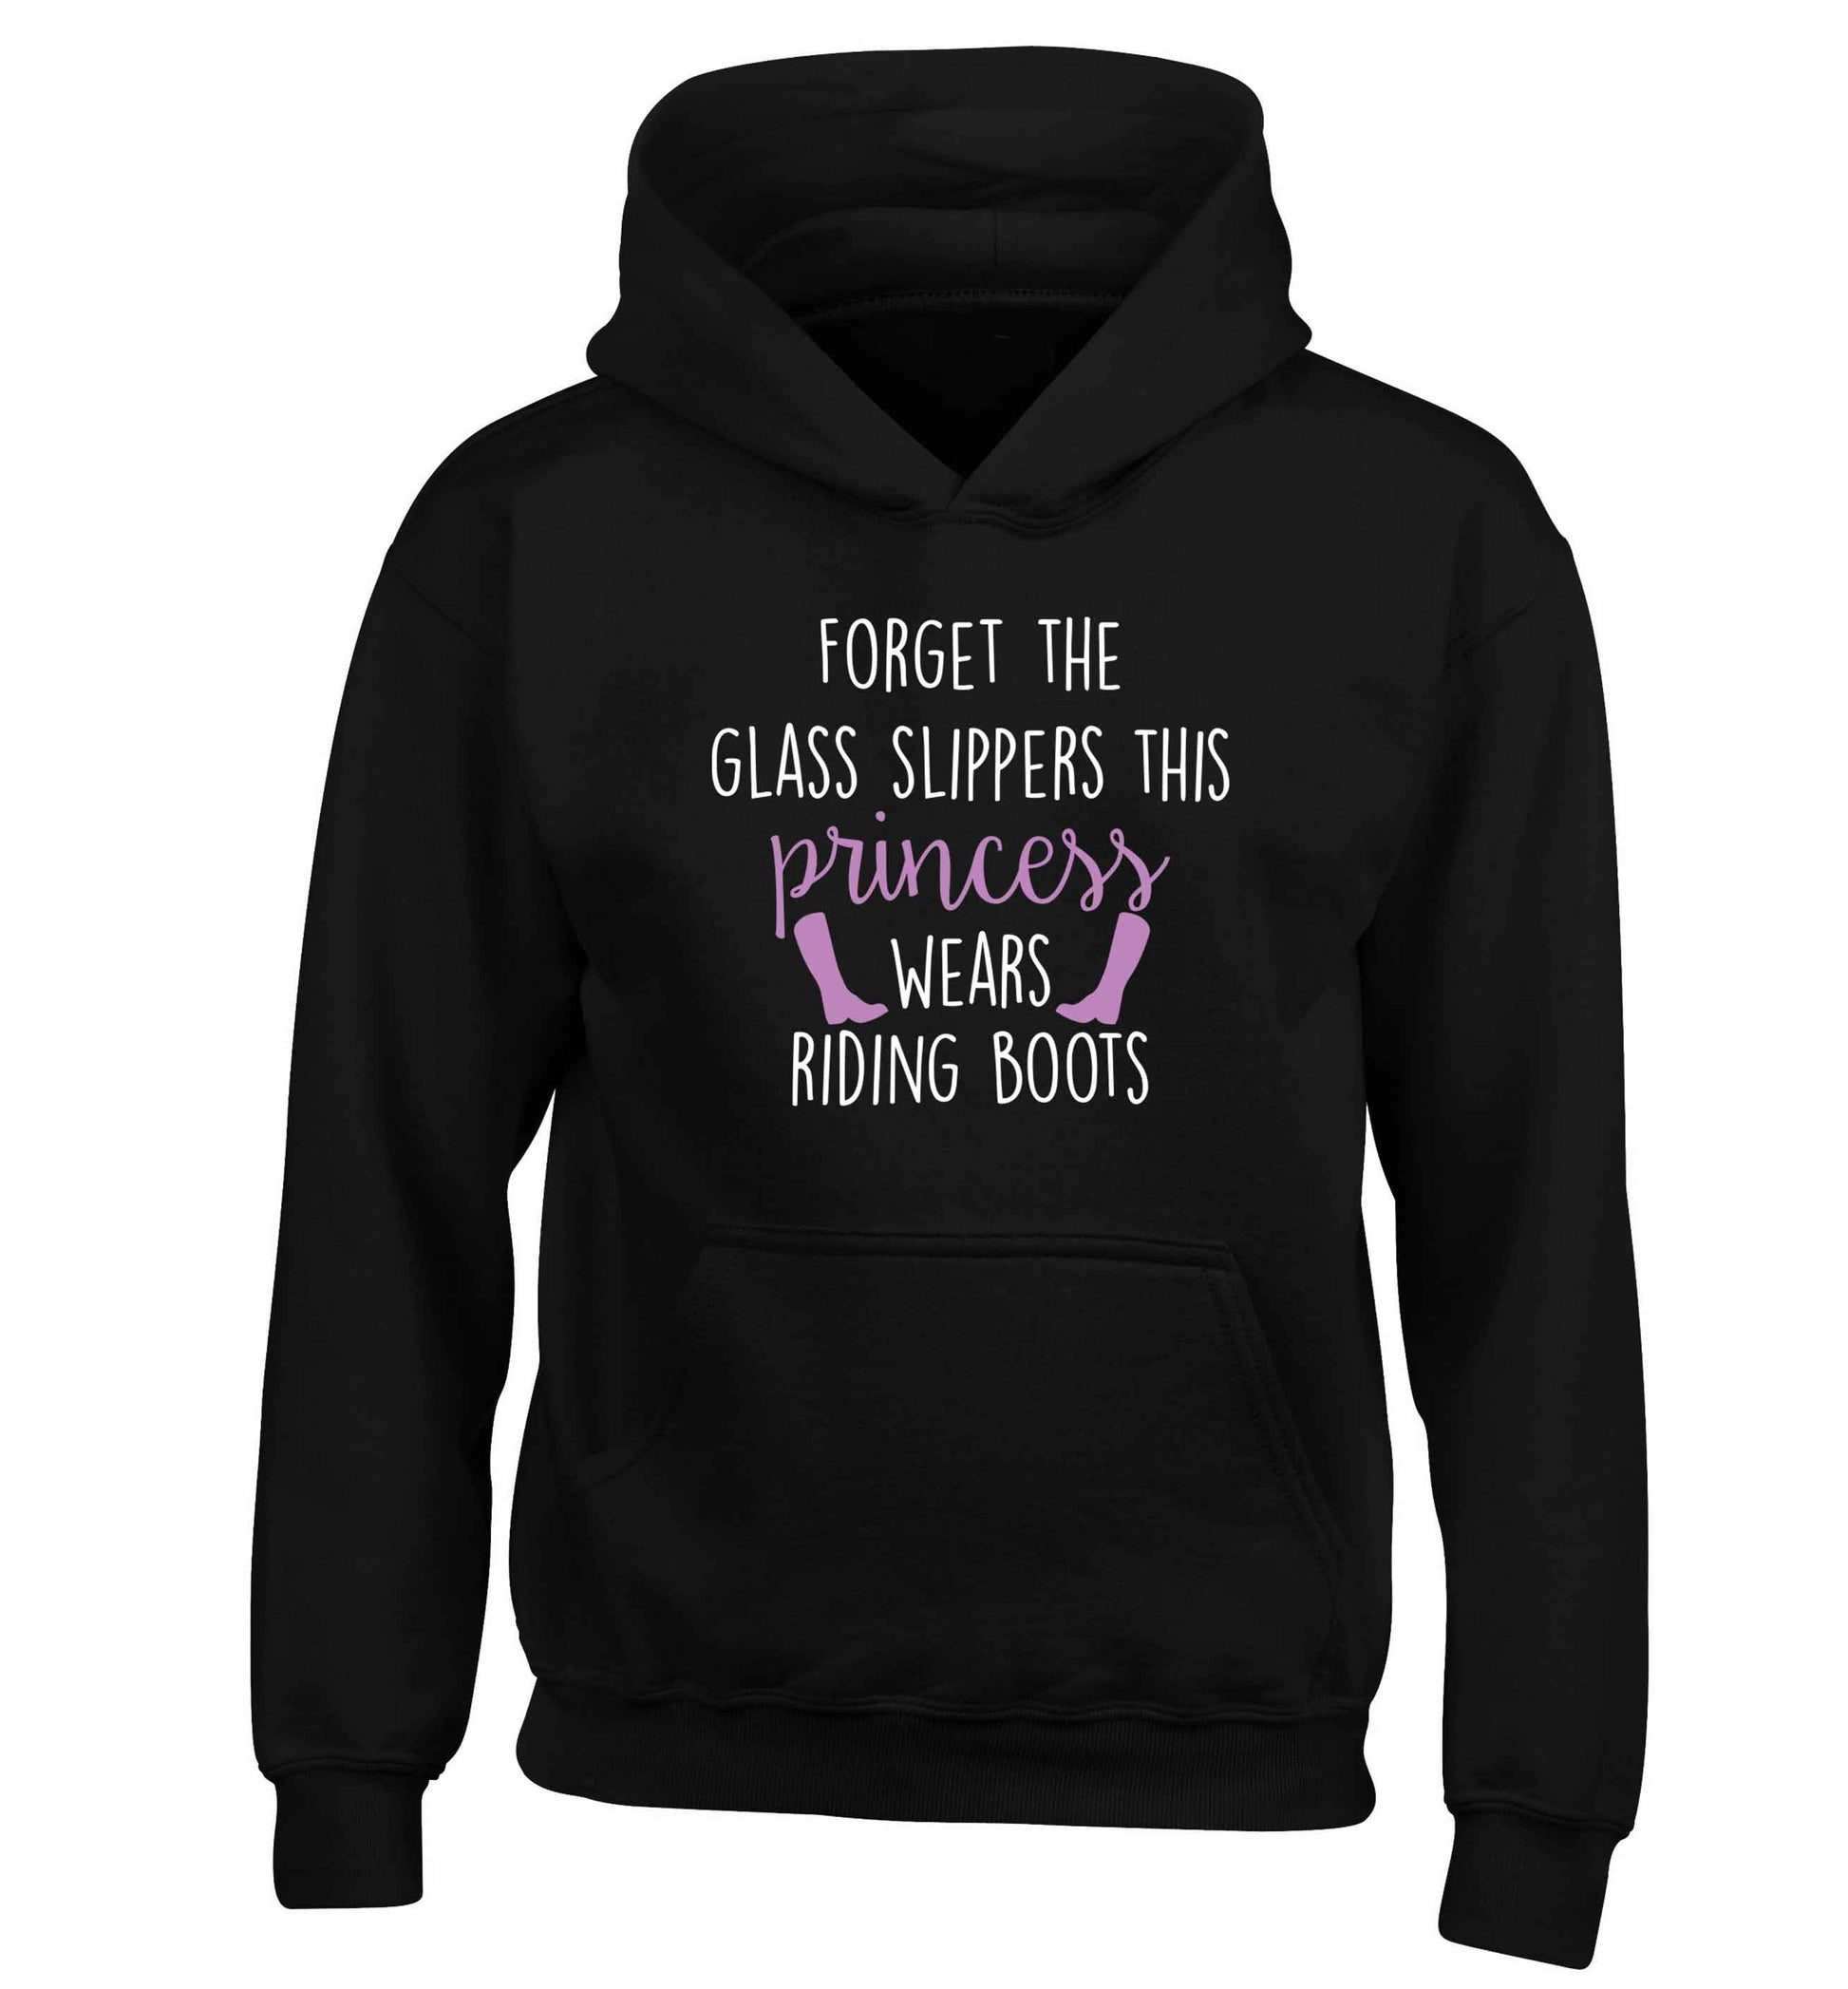 Forget the glass slippers this princess wears riding boots children's black hoodie 12-13 Years